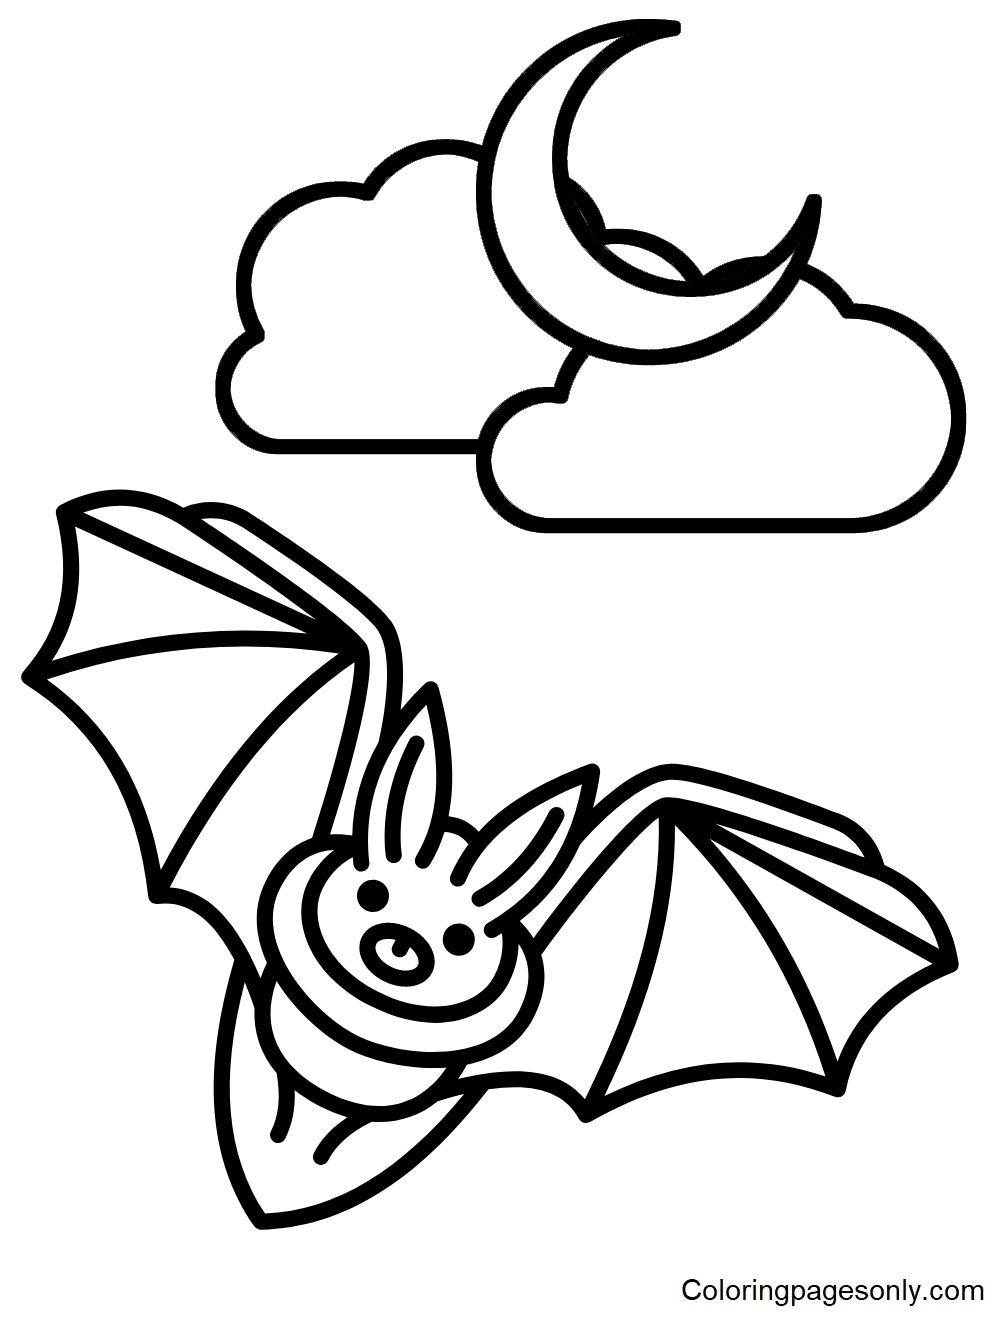 Bats to Print Coloring Page